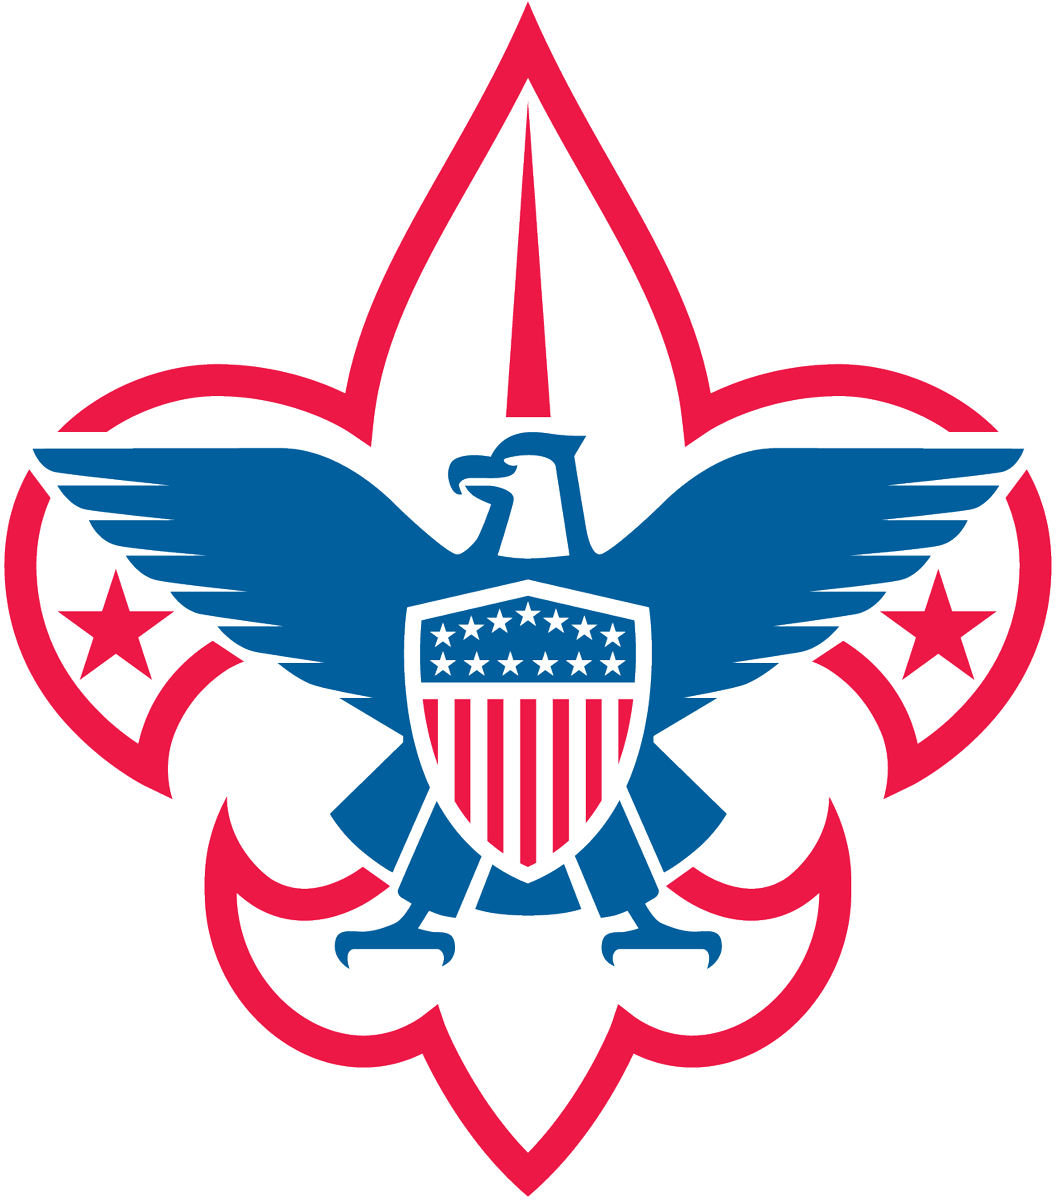 Girls Will Be Allowed To Join Boy Scouts Of America - Boy Scouts Of America (1057x1200)